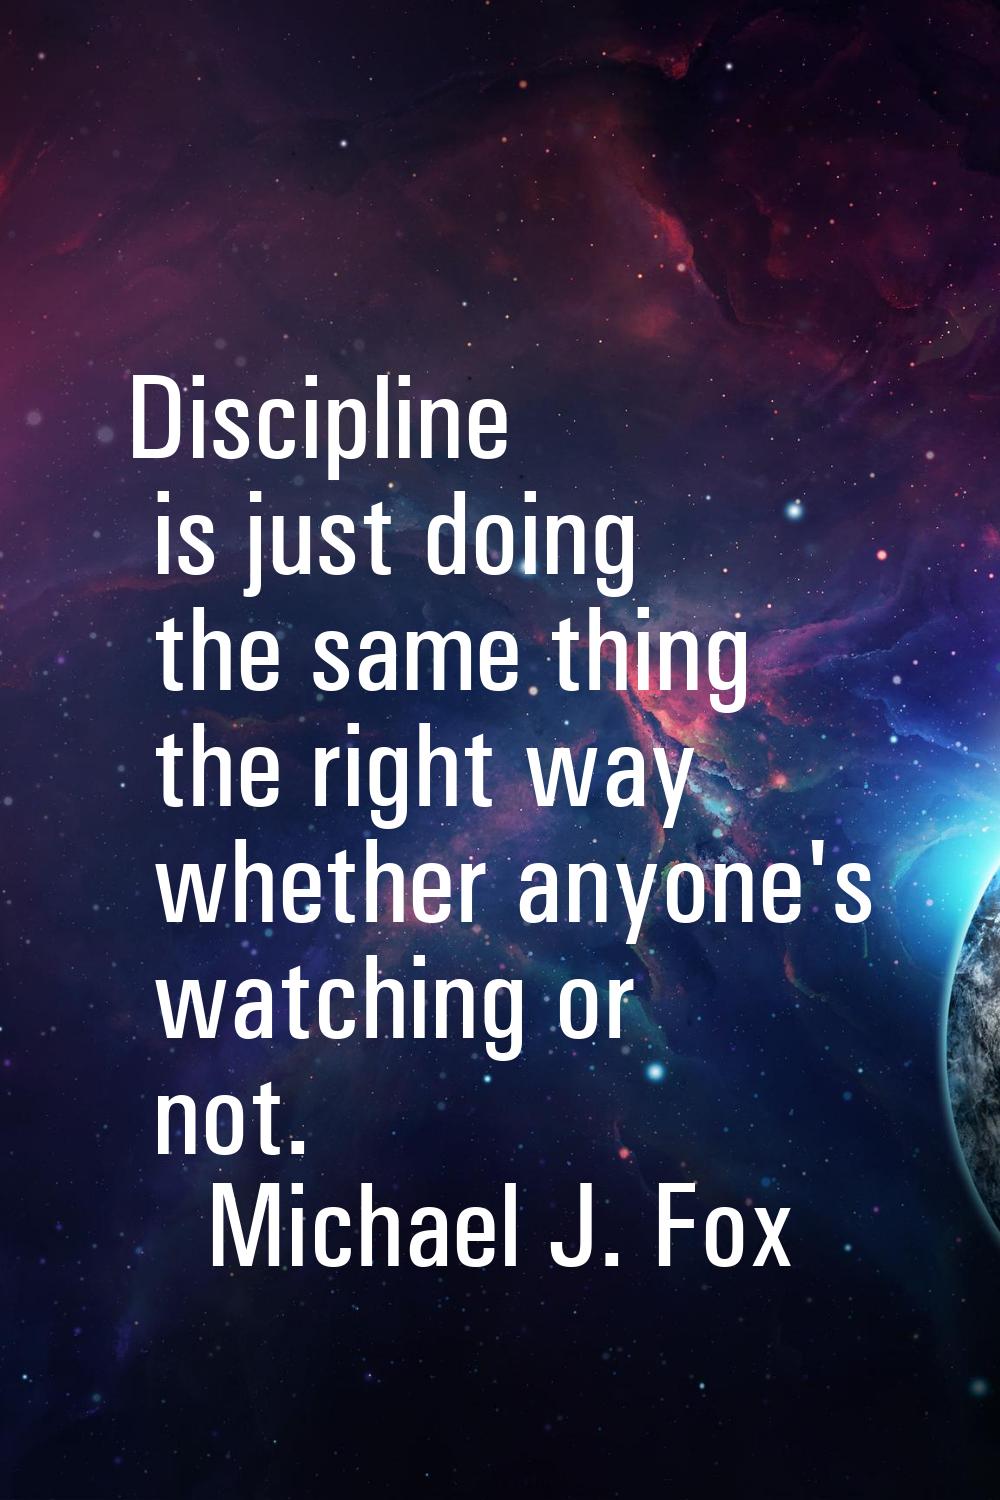 Discipline is just doing the same thing the right way whether anyone's watching or not.